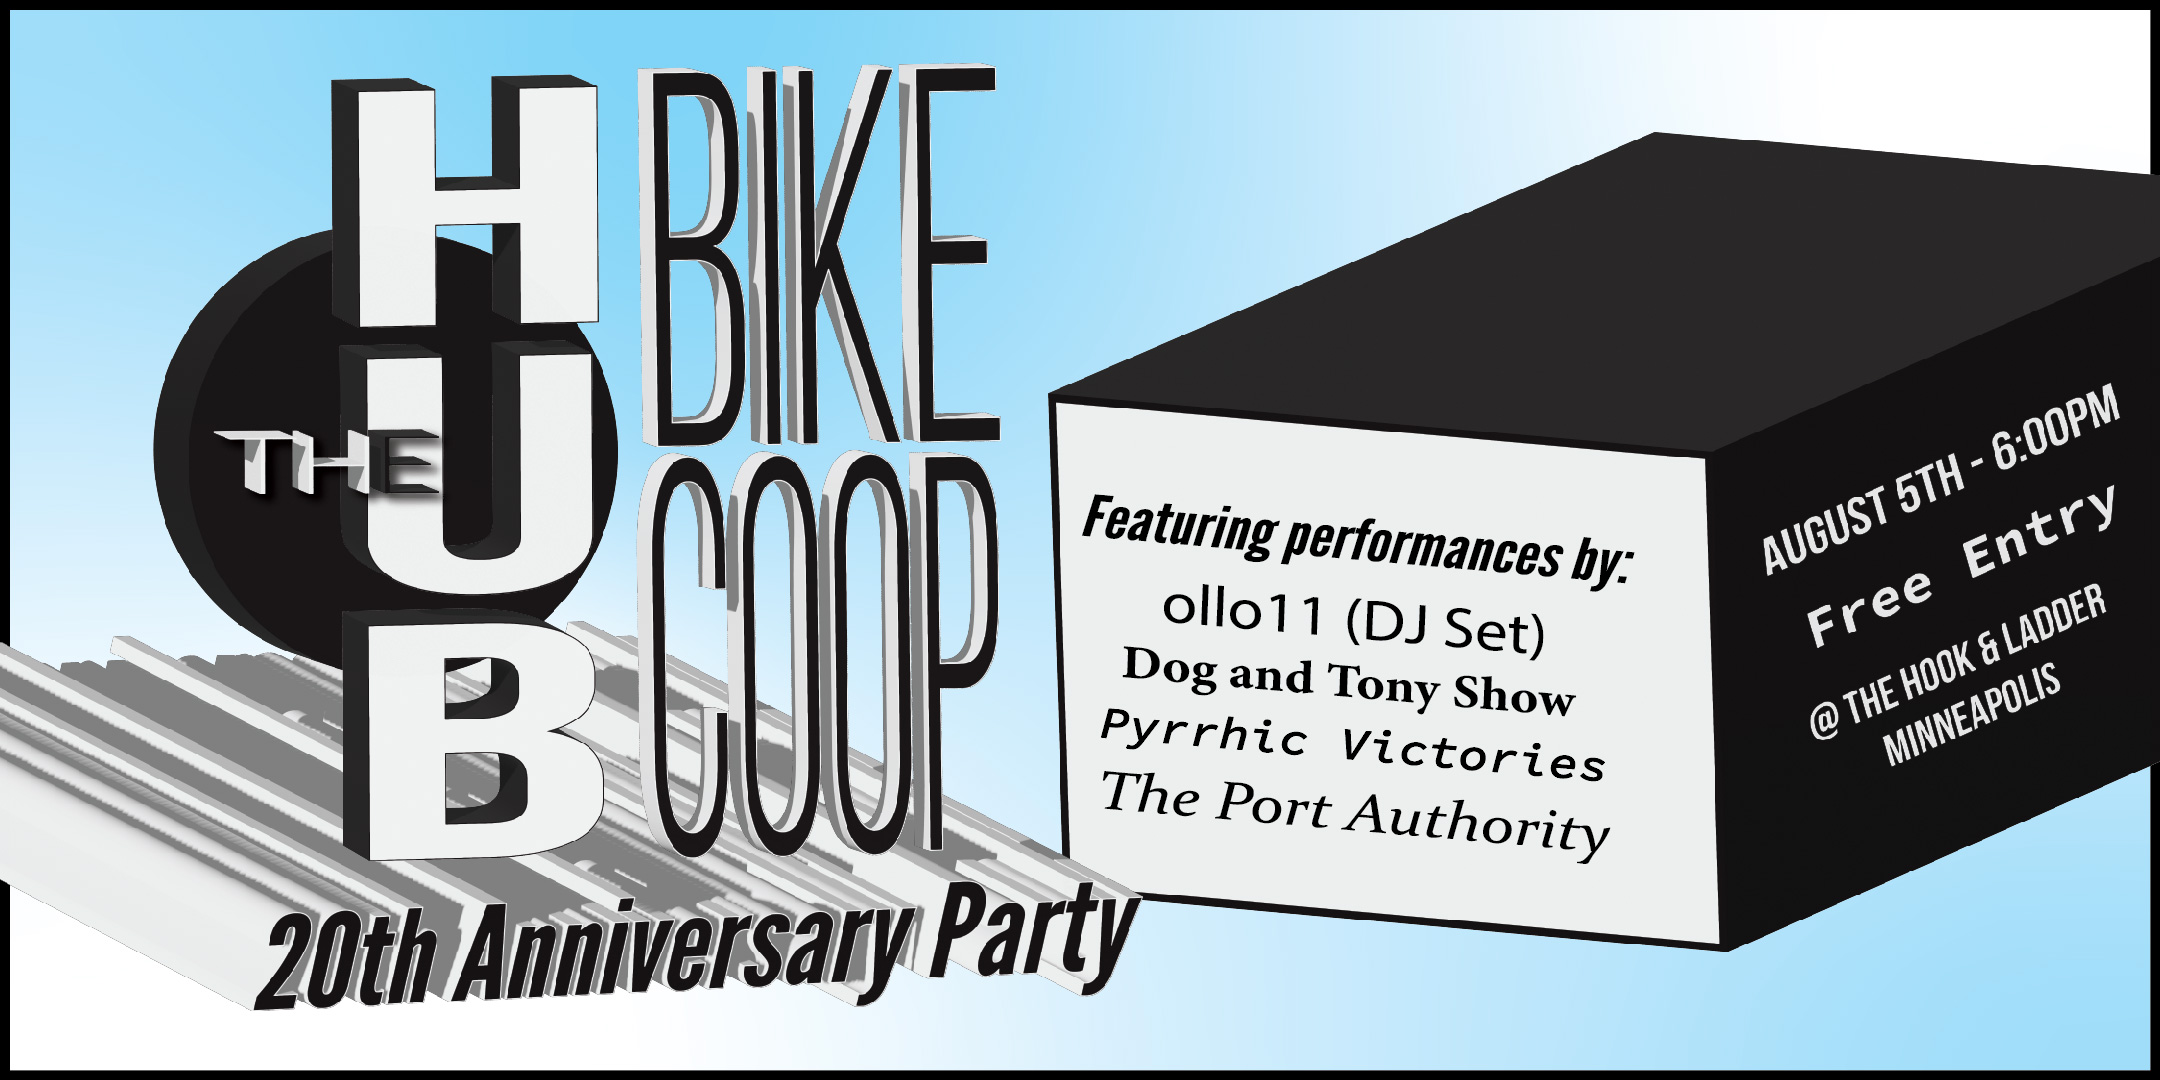 The Hub Bike Co-Op 20th Anniversary Party Friday, August 5 Under The Canopy at The Hook and Ladder Theater 6pm :: FREE (Registration)